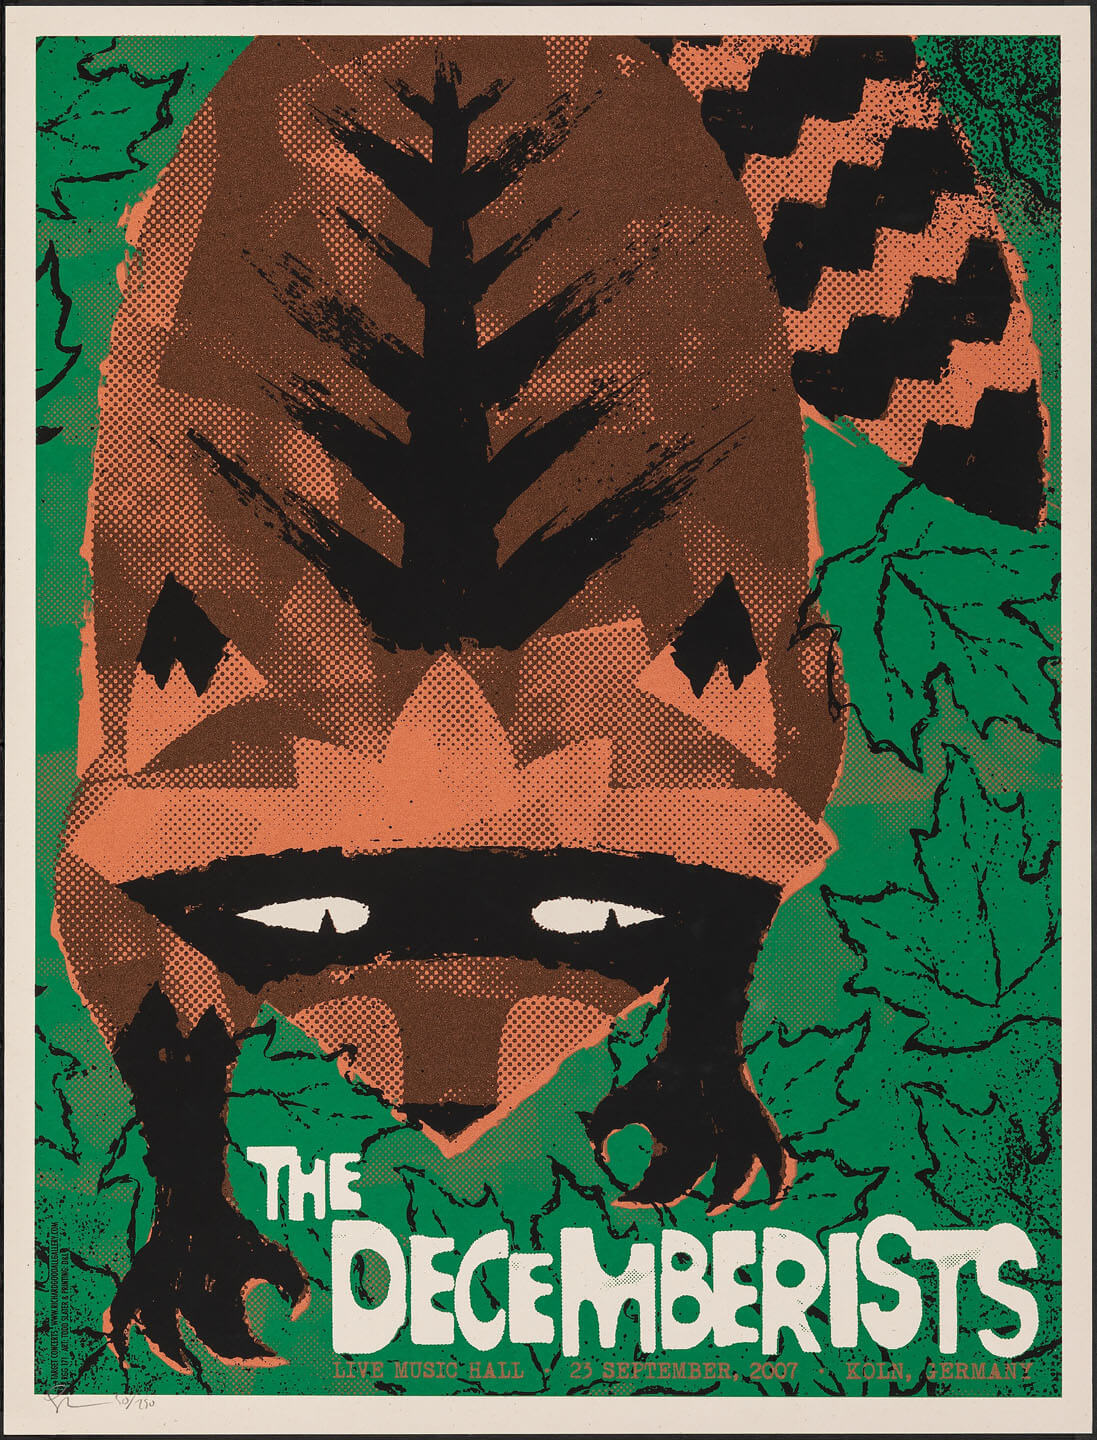 The Decemberists at Live Music Hall Concert Poster